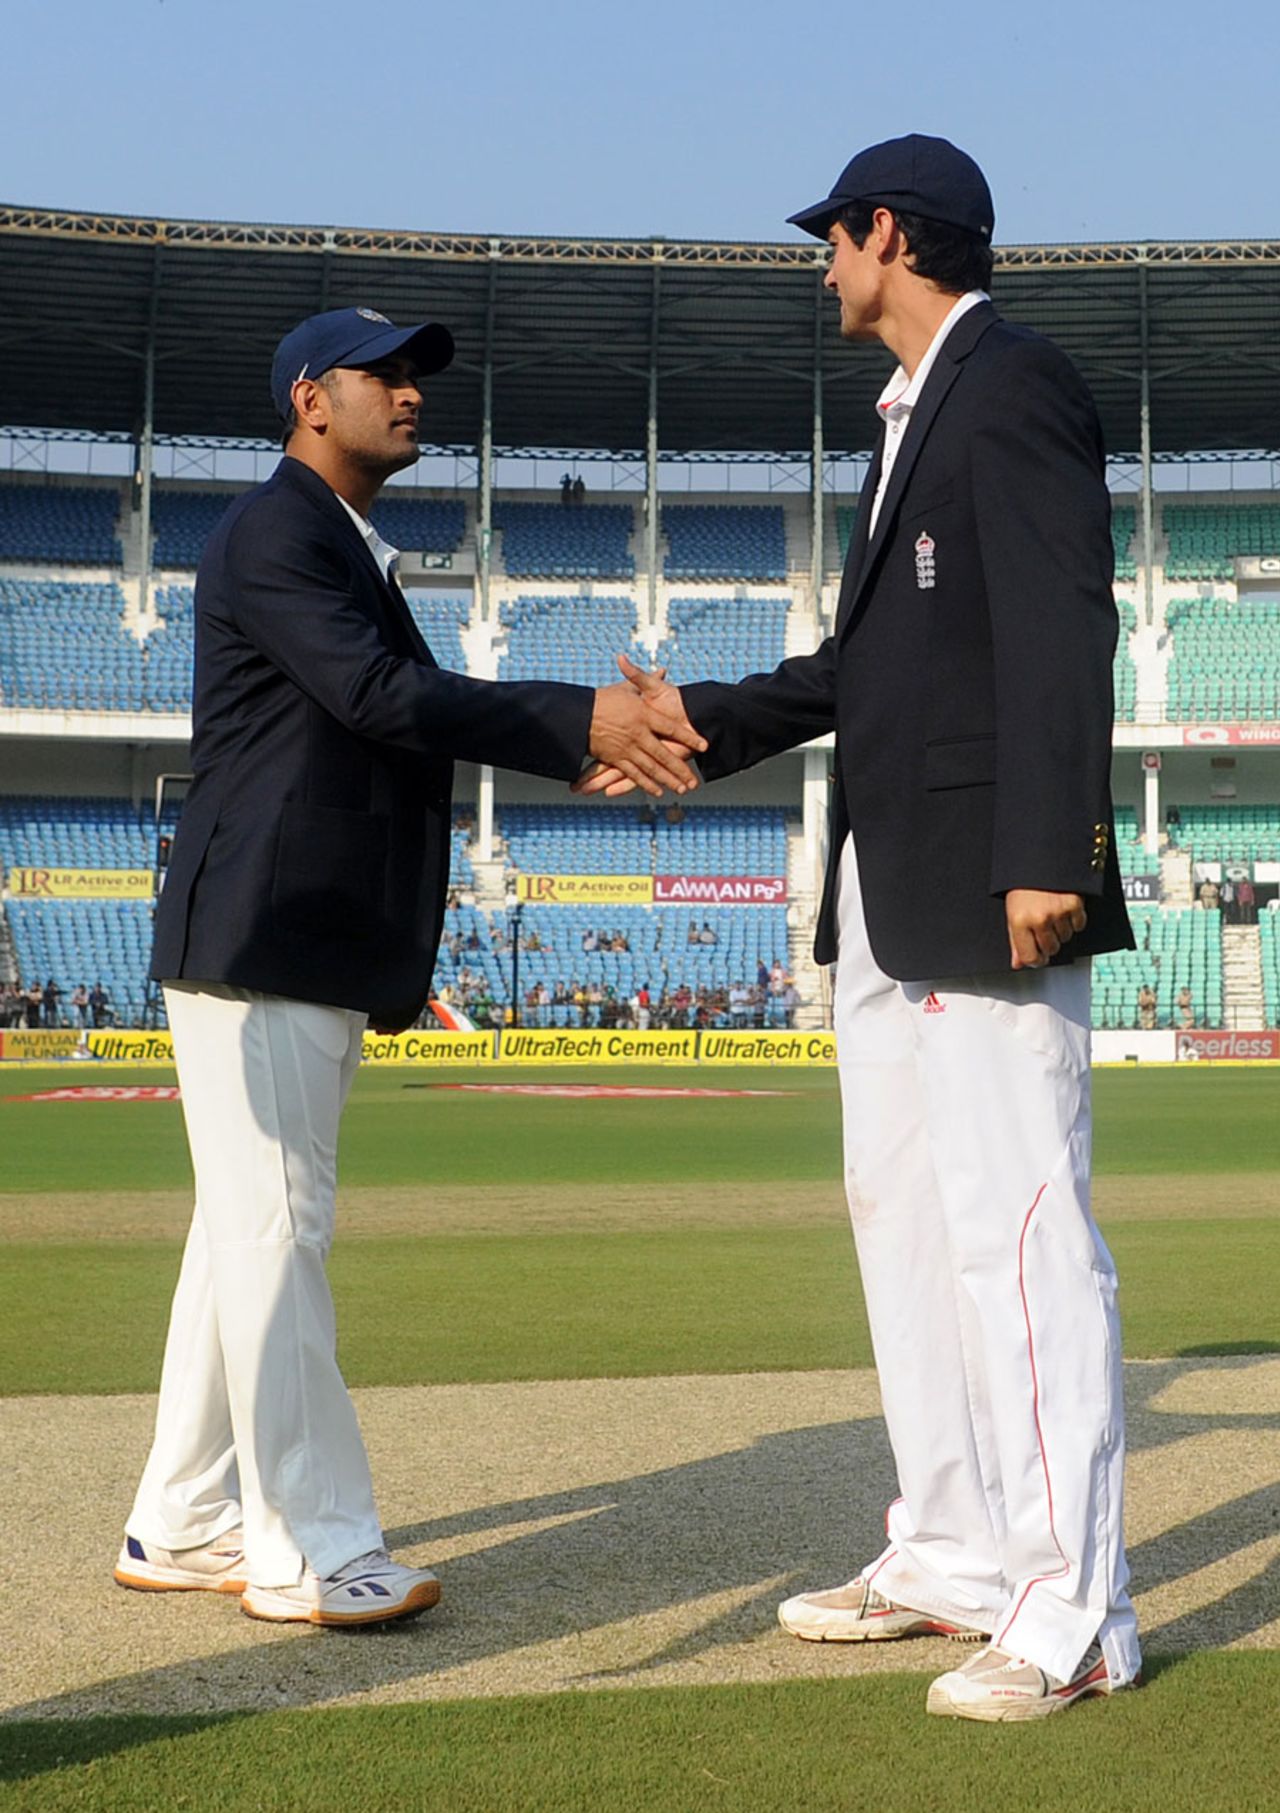 MS Dhoni and Alastair Cook shake hands at the toss, India v England, 4th Test, Nagpur, 1st day, December 13, 2012